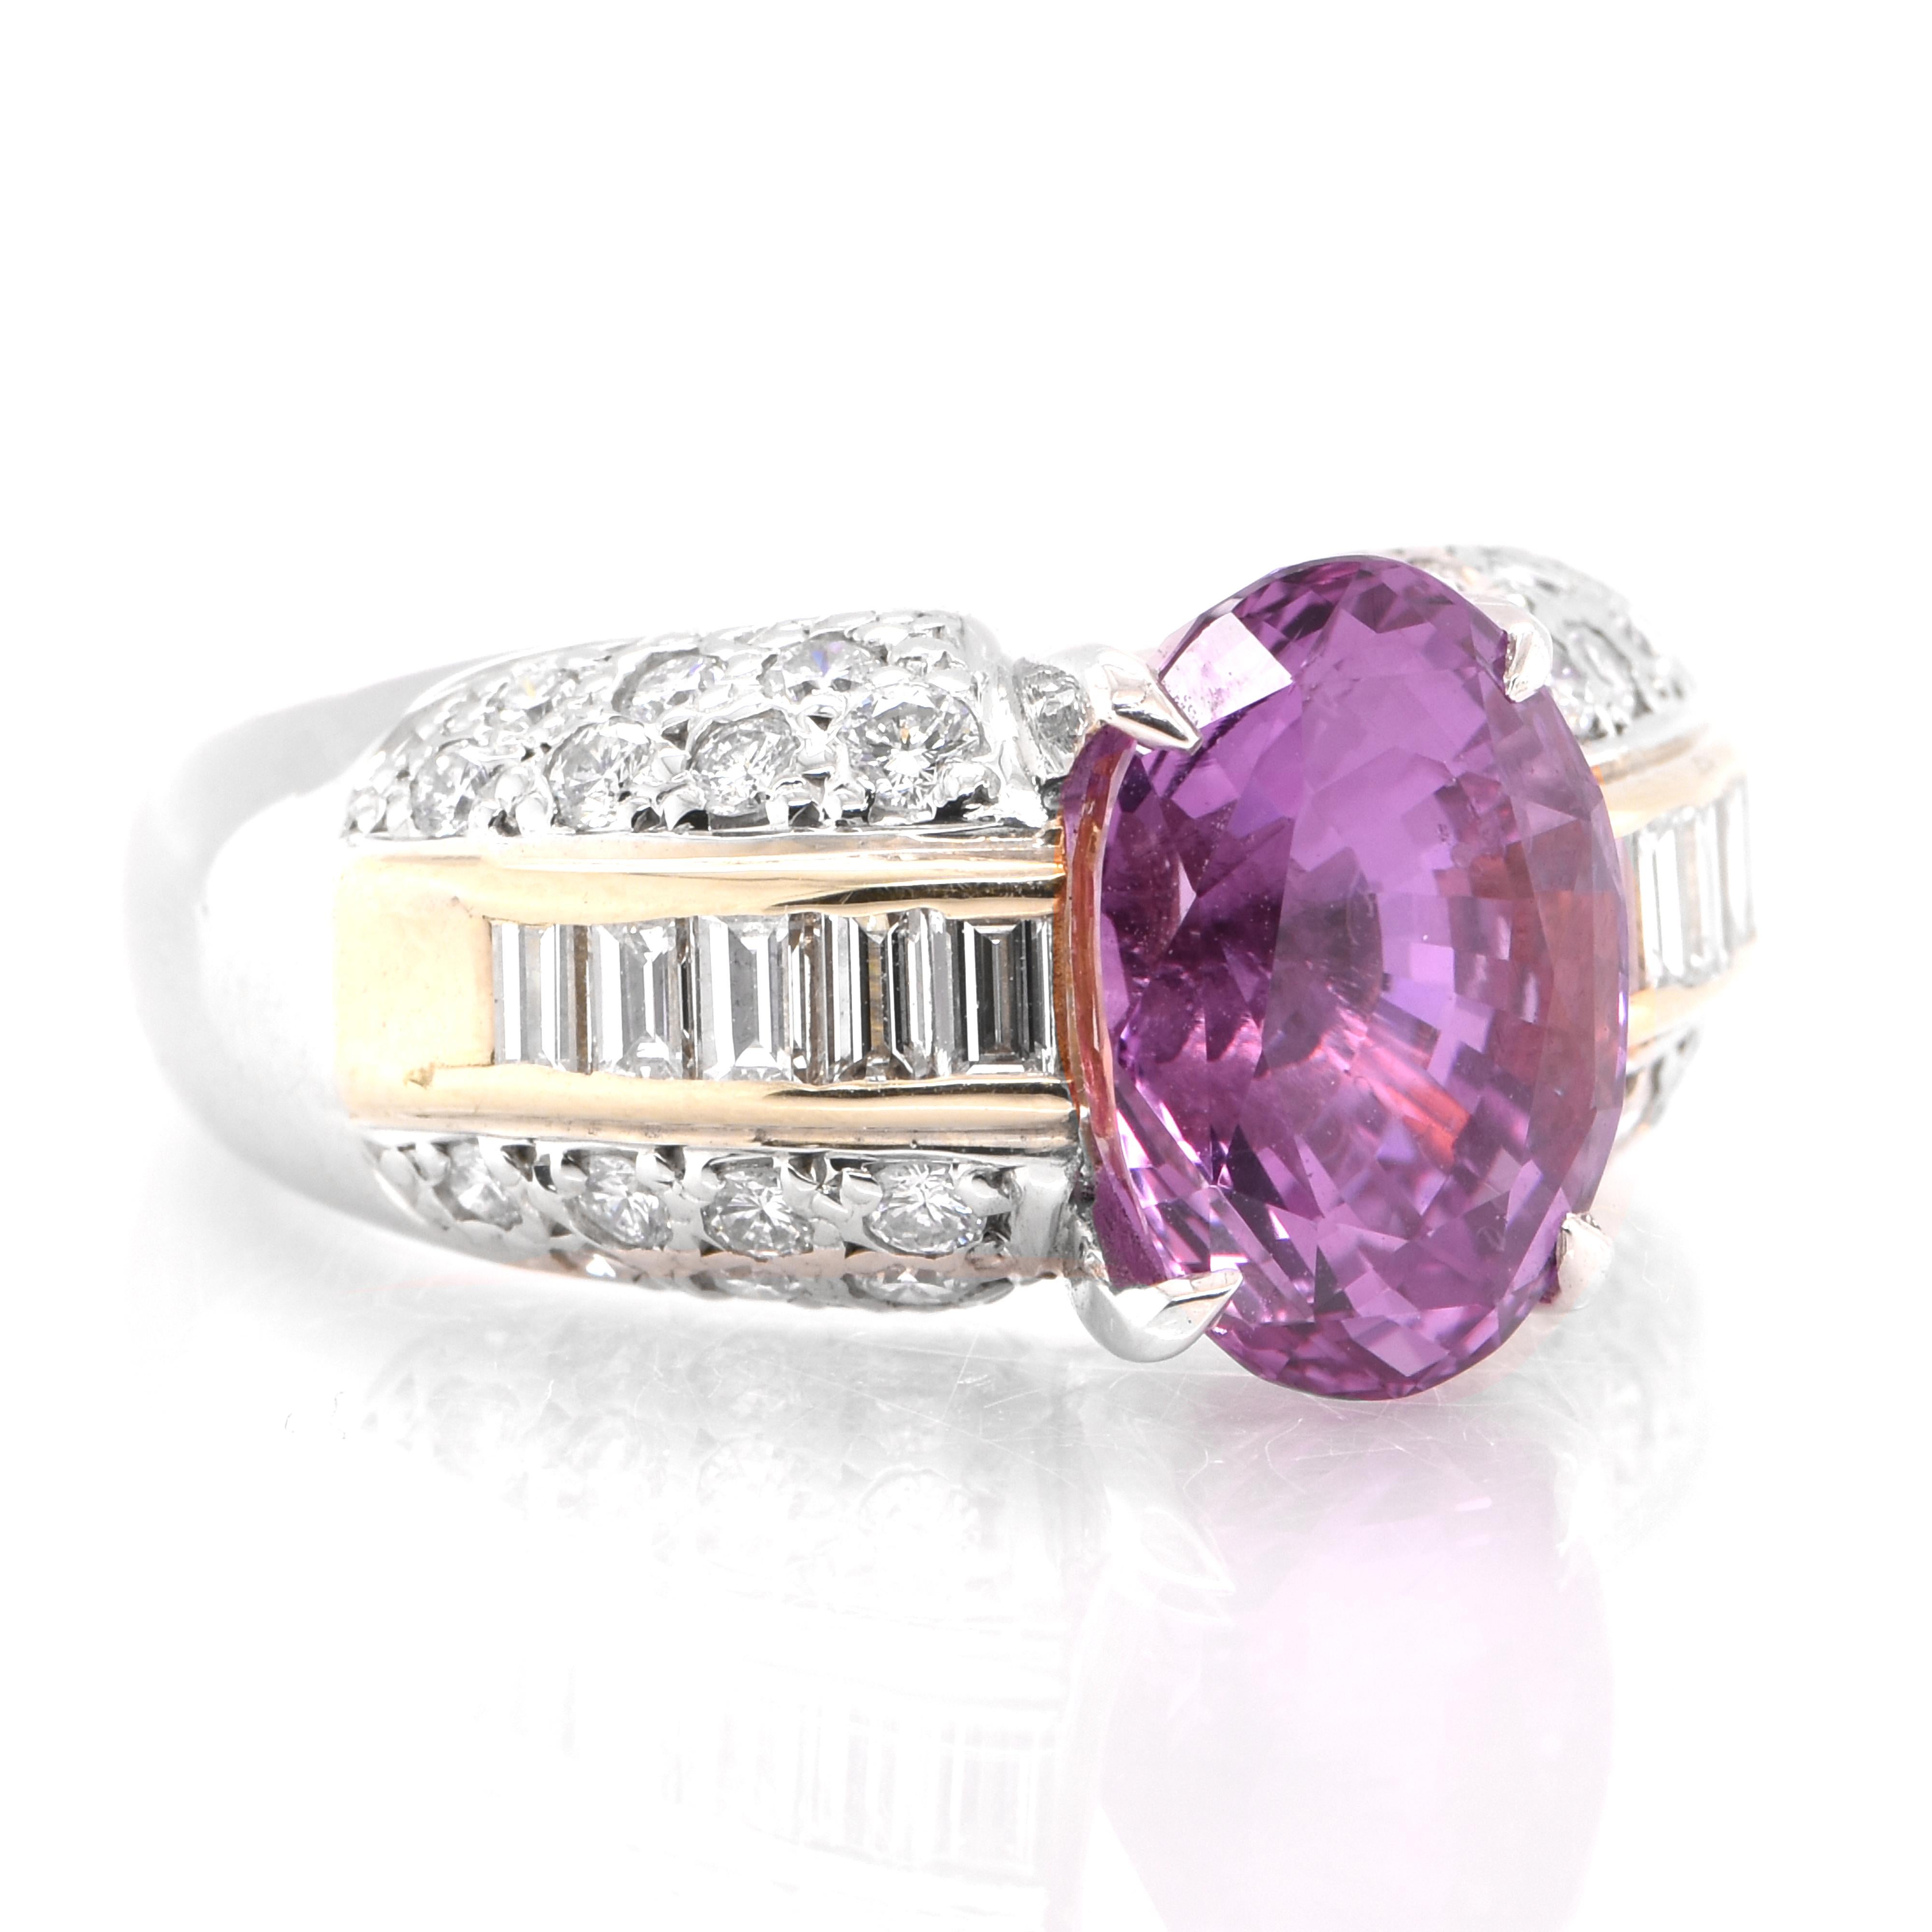 An elegant Cocktail ring with a GRS lab certified 5.06 Carat, Natural Pink Sapphire and 0.95 Carats of Diamond Accents set in both 18K Gold and Platinum. Sapphires have extraordinary durability - they excel in hardness as well as toughness and